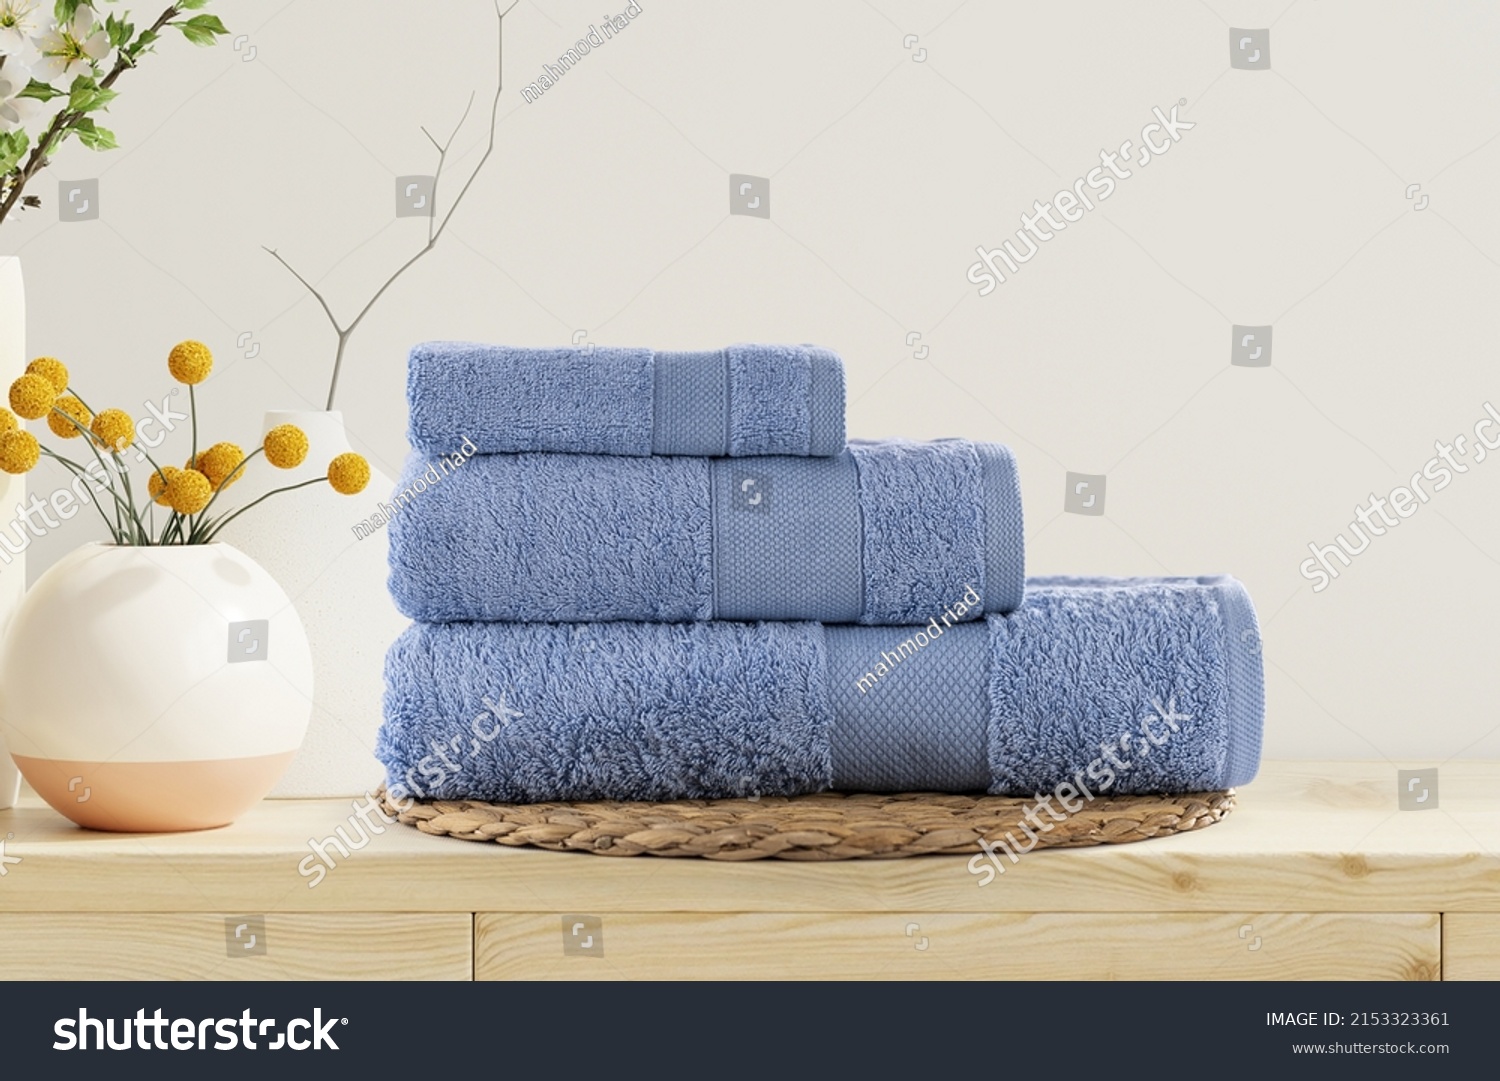 3 Piece Plush Bath Towels Set Isolated. Close-Up Shot Woven Terrycloth. Brand New Hotel  Spa Cotton Soft Beautiful Design Kitchen Towels. three Piece 100 Cotton Ultra Absorbent Terry Hand Towel
  #2153323361